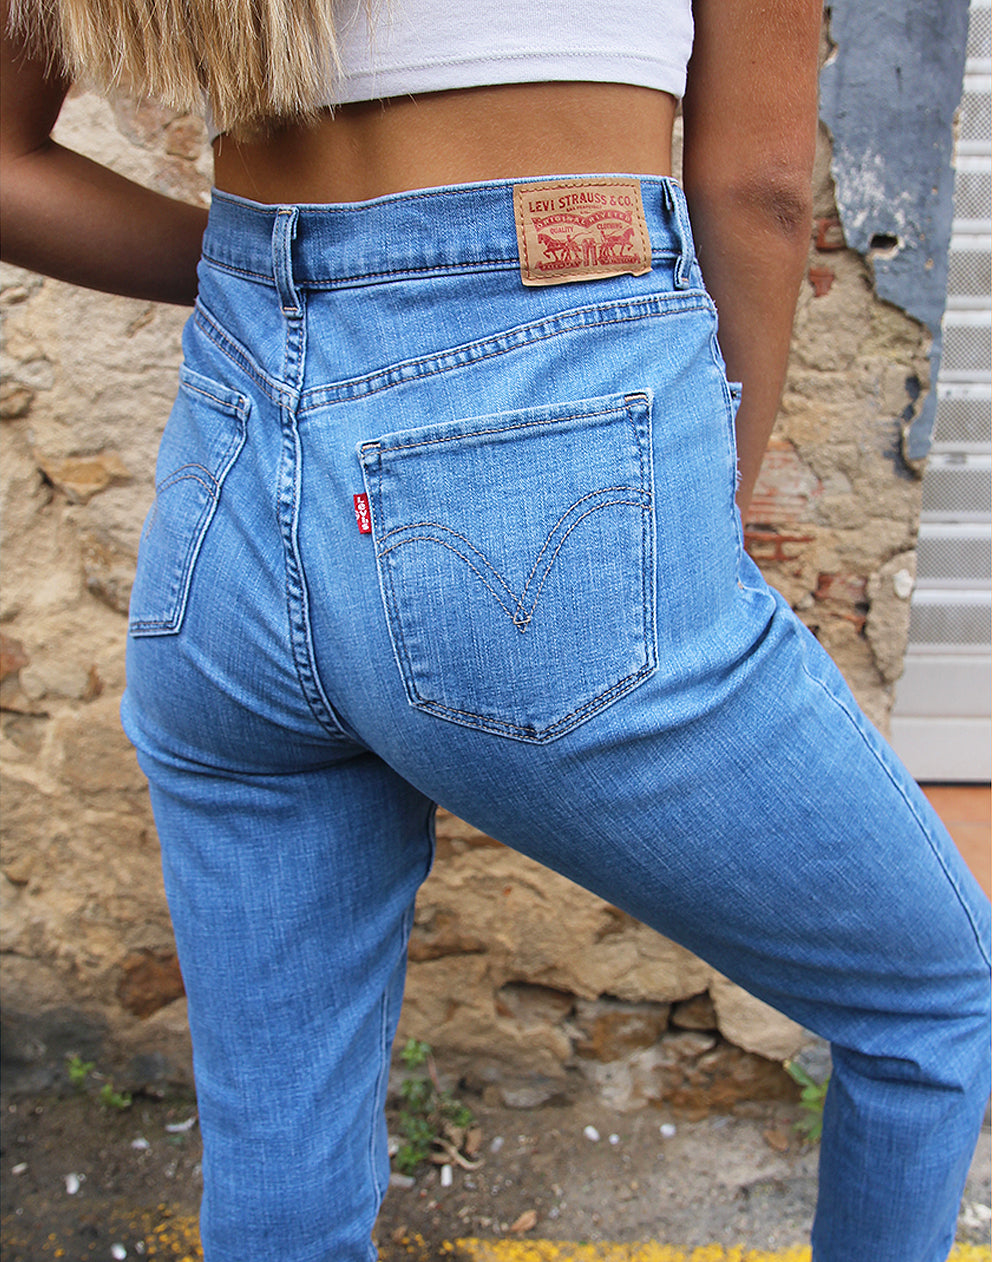 520 Levi's jeans in blue